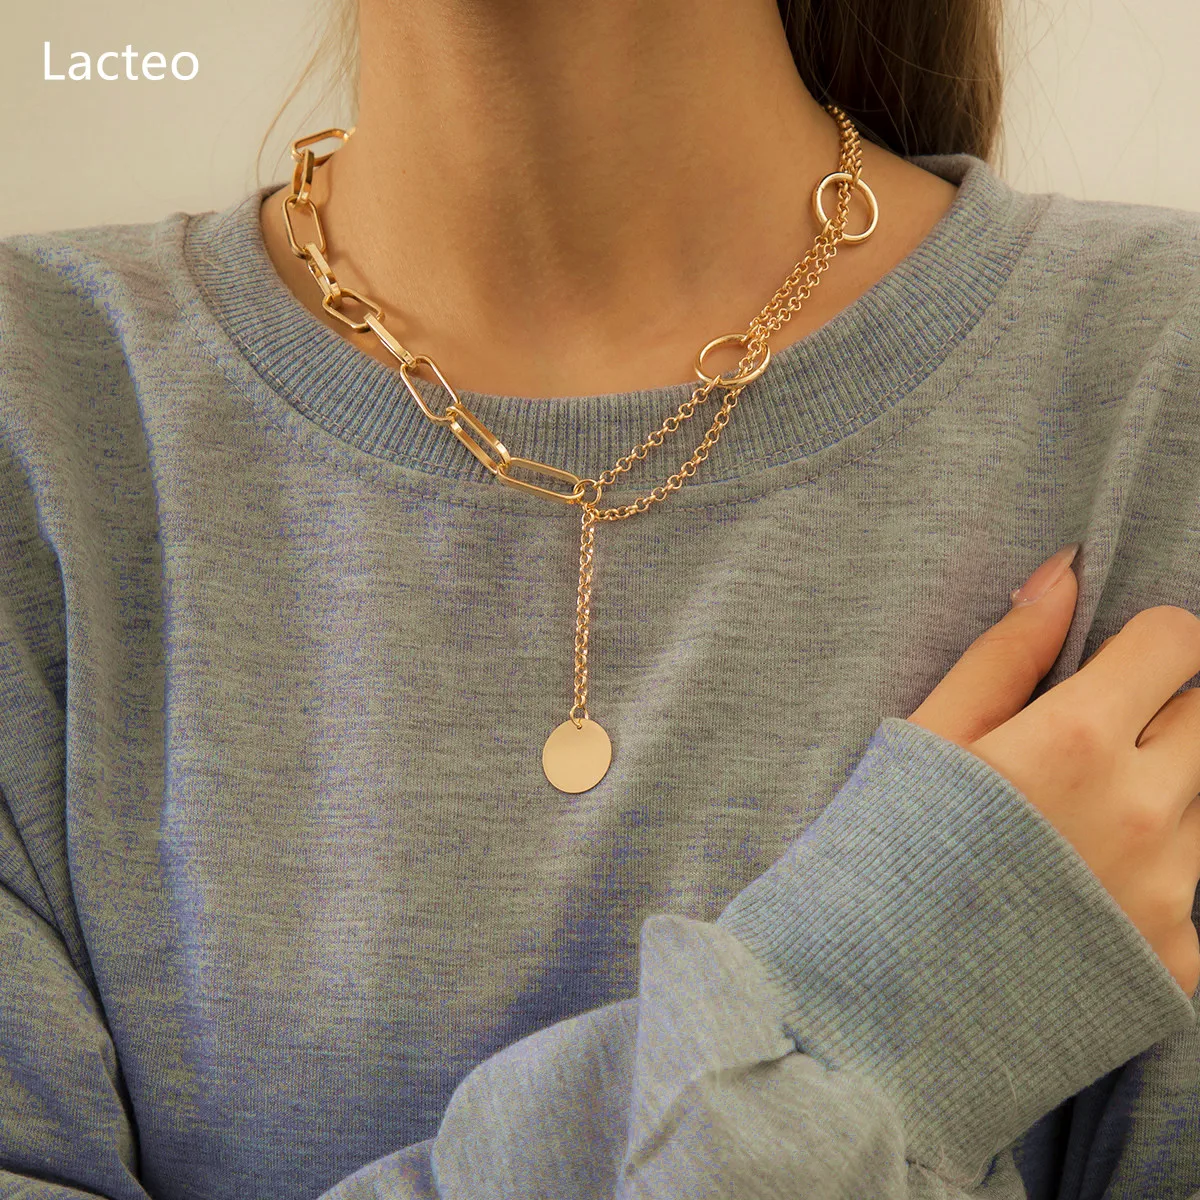 

Lacteo Steampunk Big Round Sign Cross Chain Choker Necklace For Women Hip Hop Metal Carved Coin Pendant Necklace Jewelry